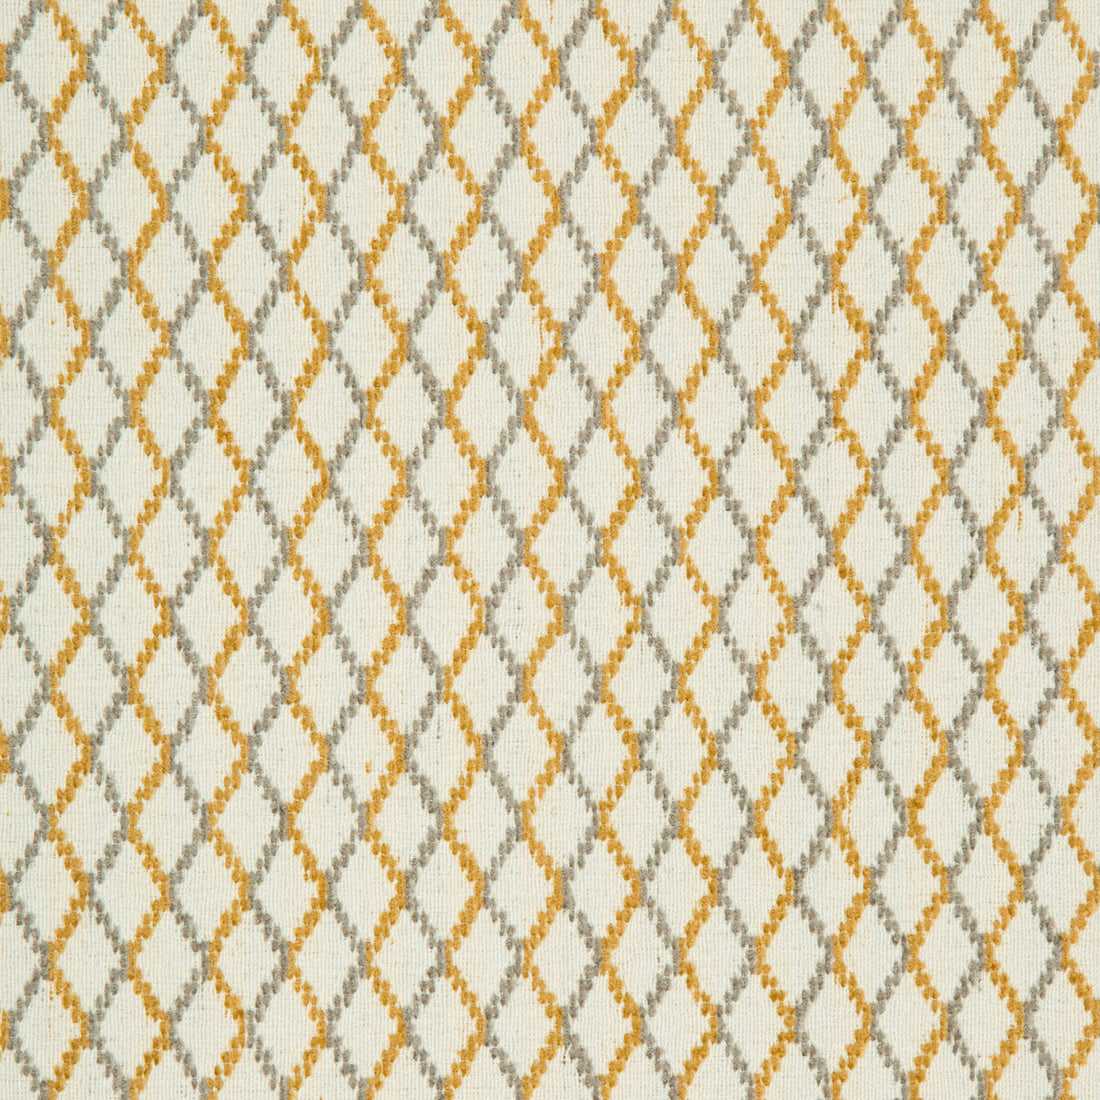 Kravet Contract fabric in 34735-411 color - pattern 34735.411.0 - by Kravet Contract in the Crypton Incase collection